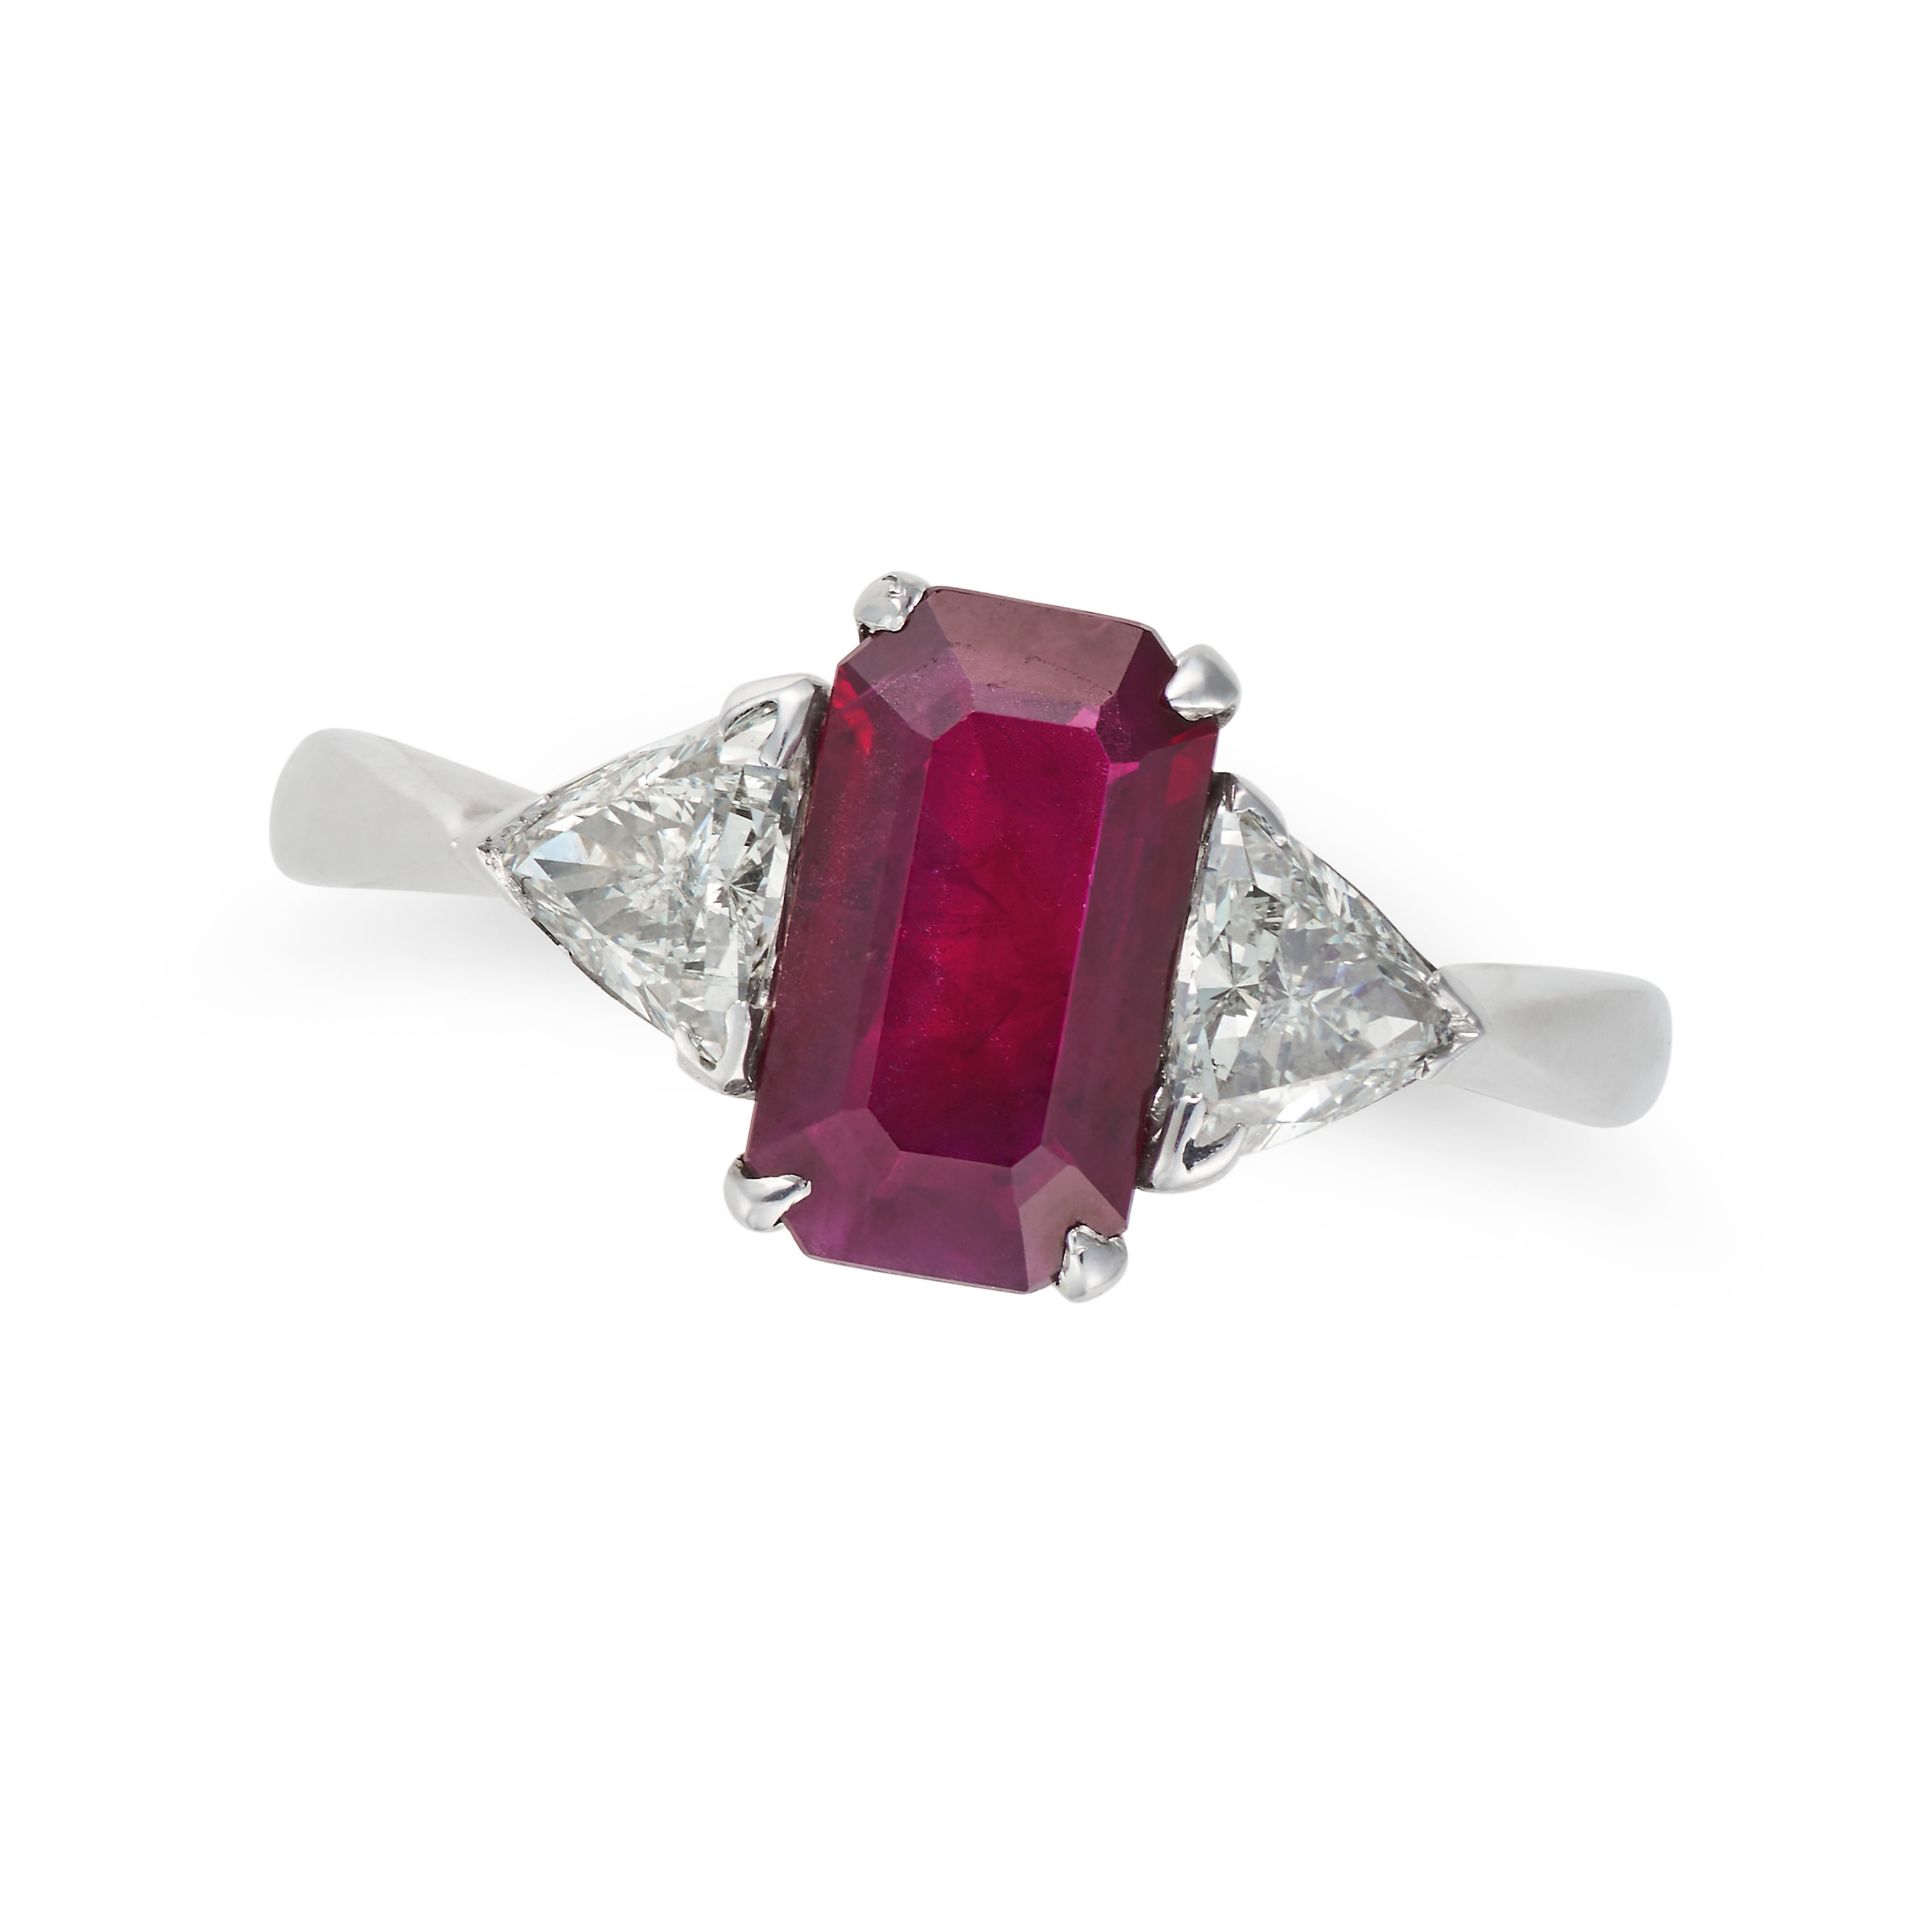 A BURMESE RUBY AND DIAMOND THREE STONE RING in 18ct white gold, set with an octagonal step cut ru...